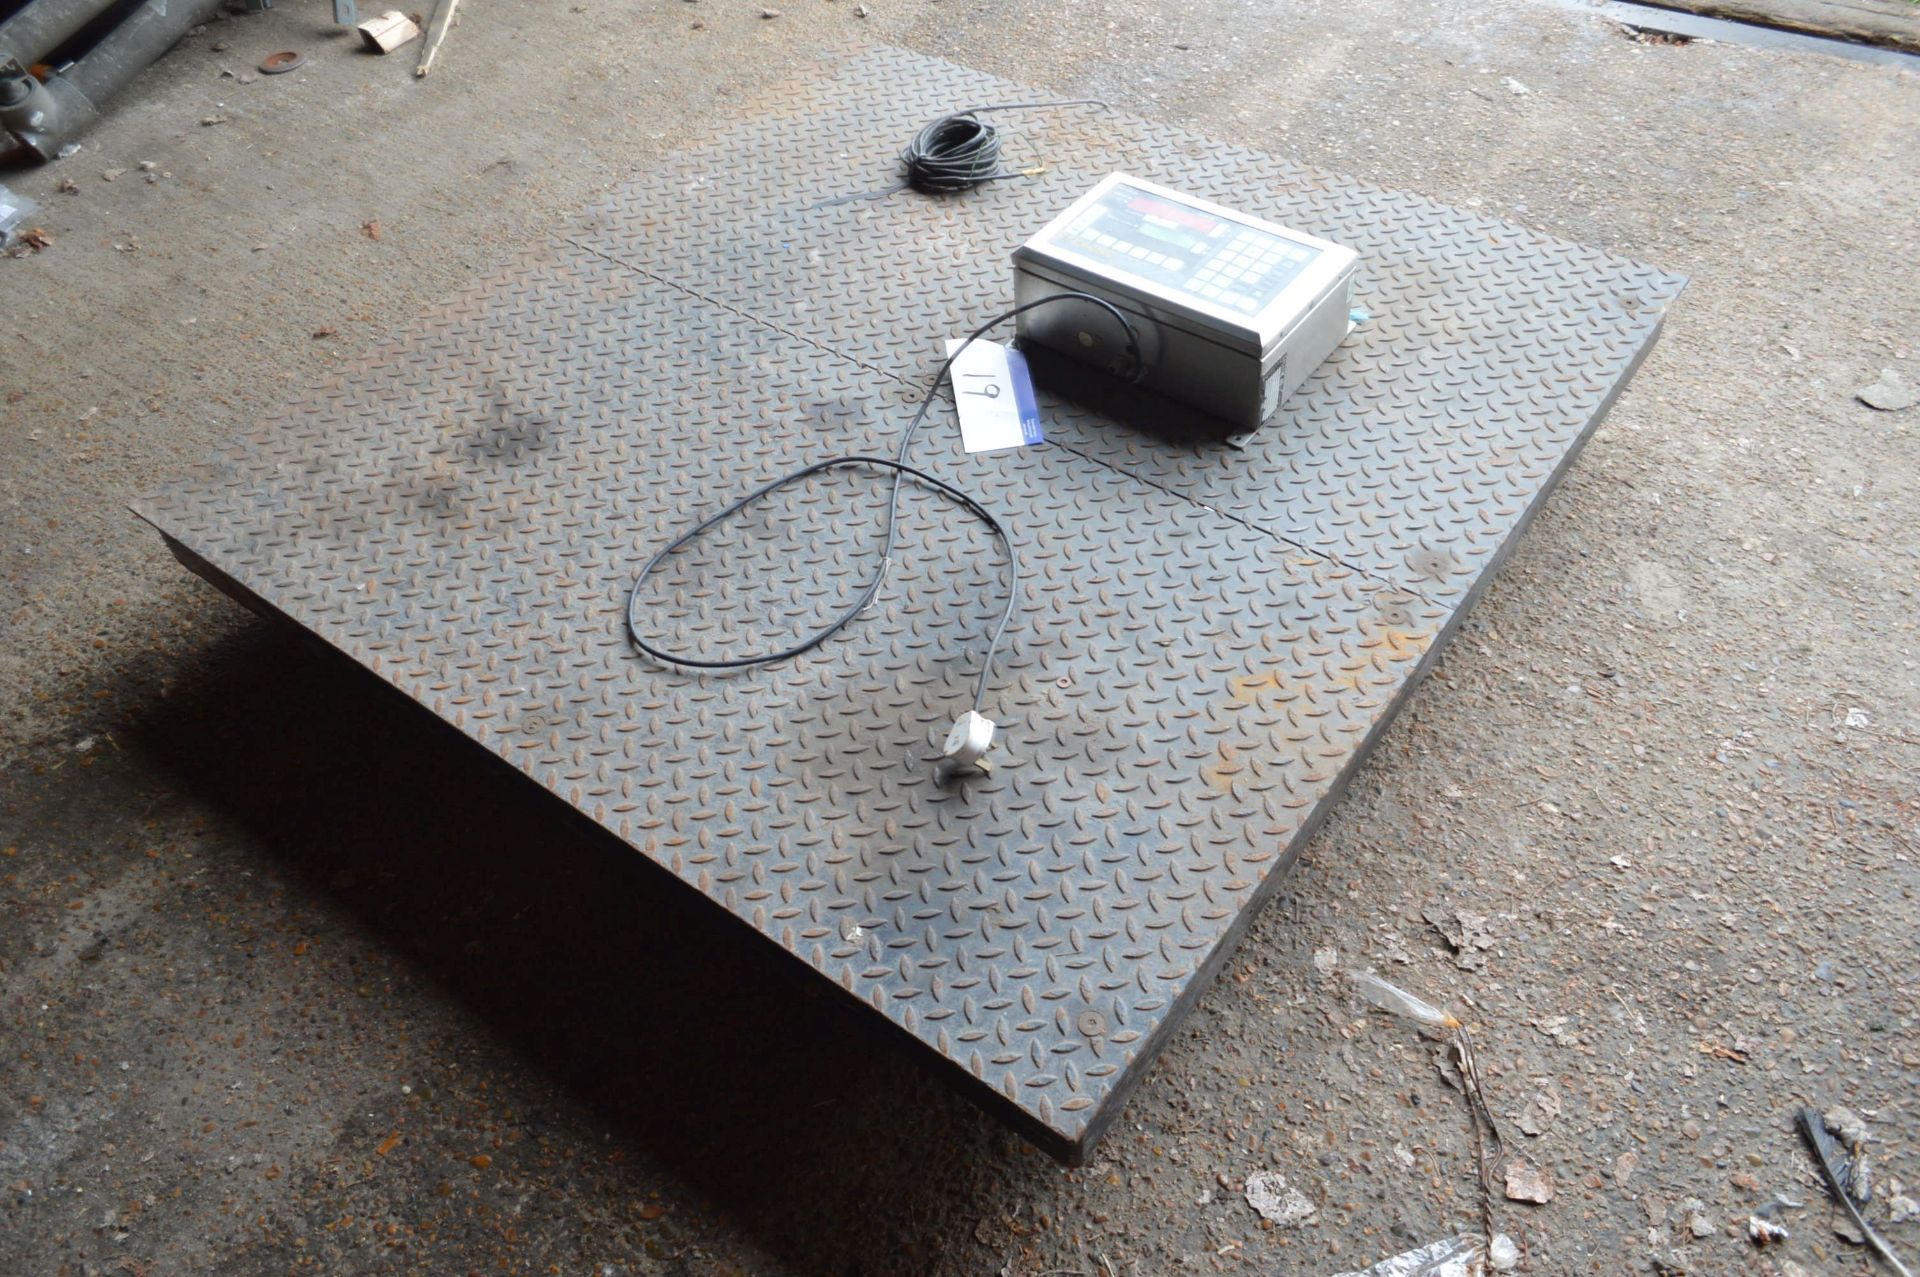 Loadcell Platform Weighing Scale, 1500mm x 1500mm, with Stevens system 280 digital read out - Image 3 of 3